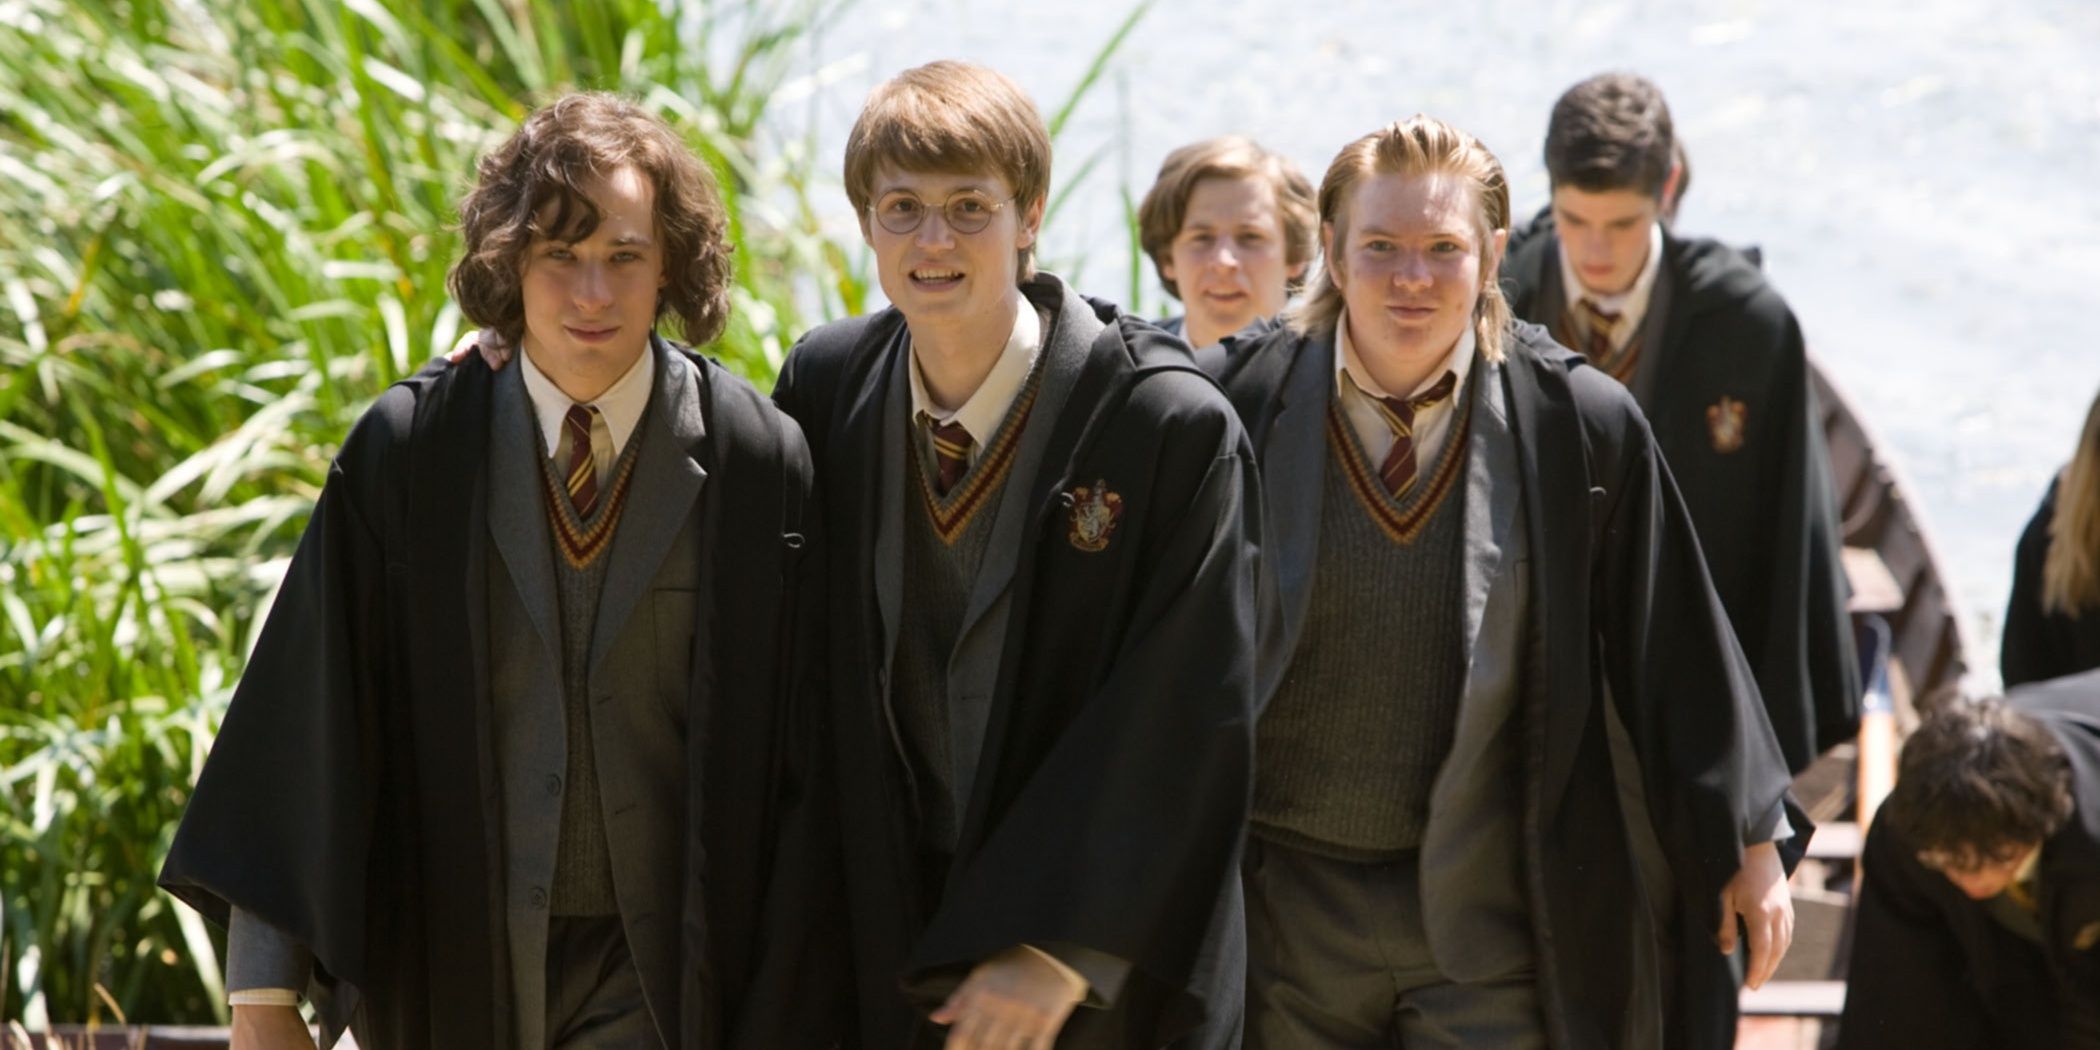 The Marauders in Harry Potter